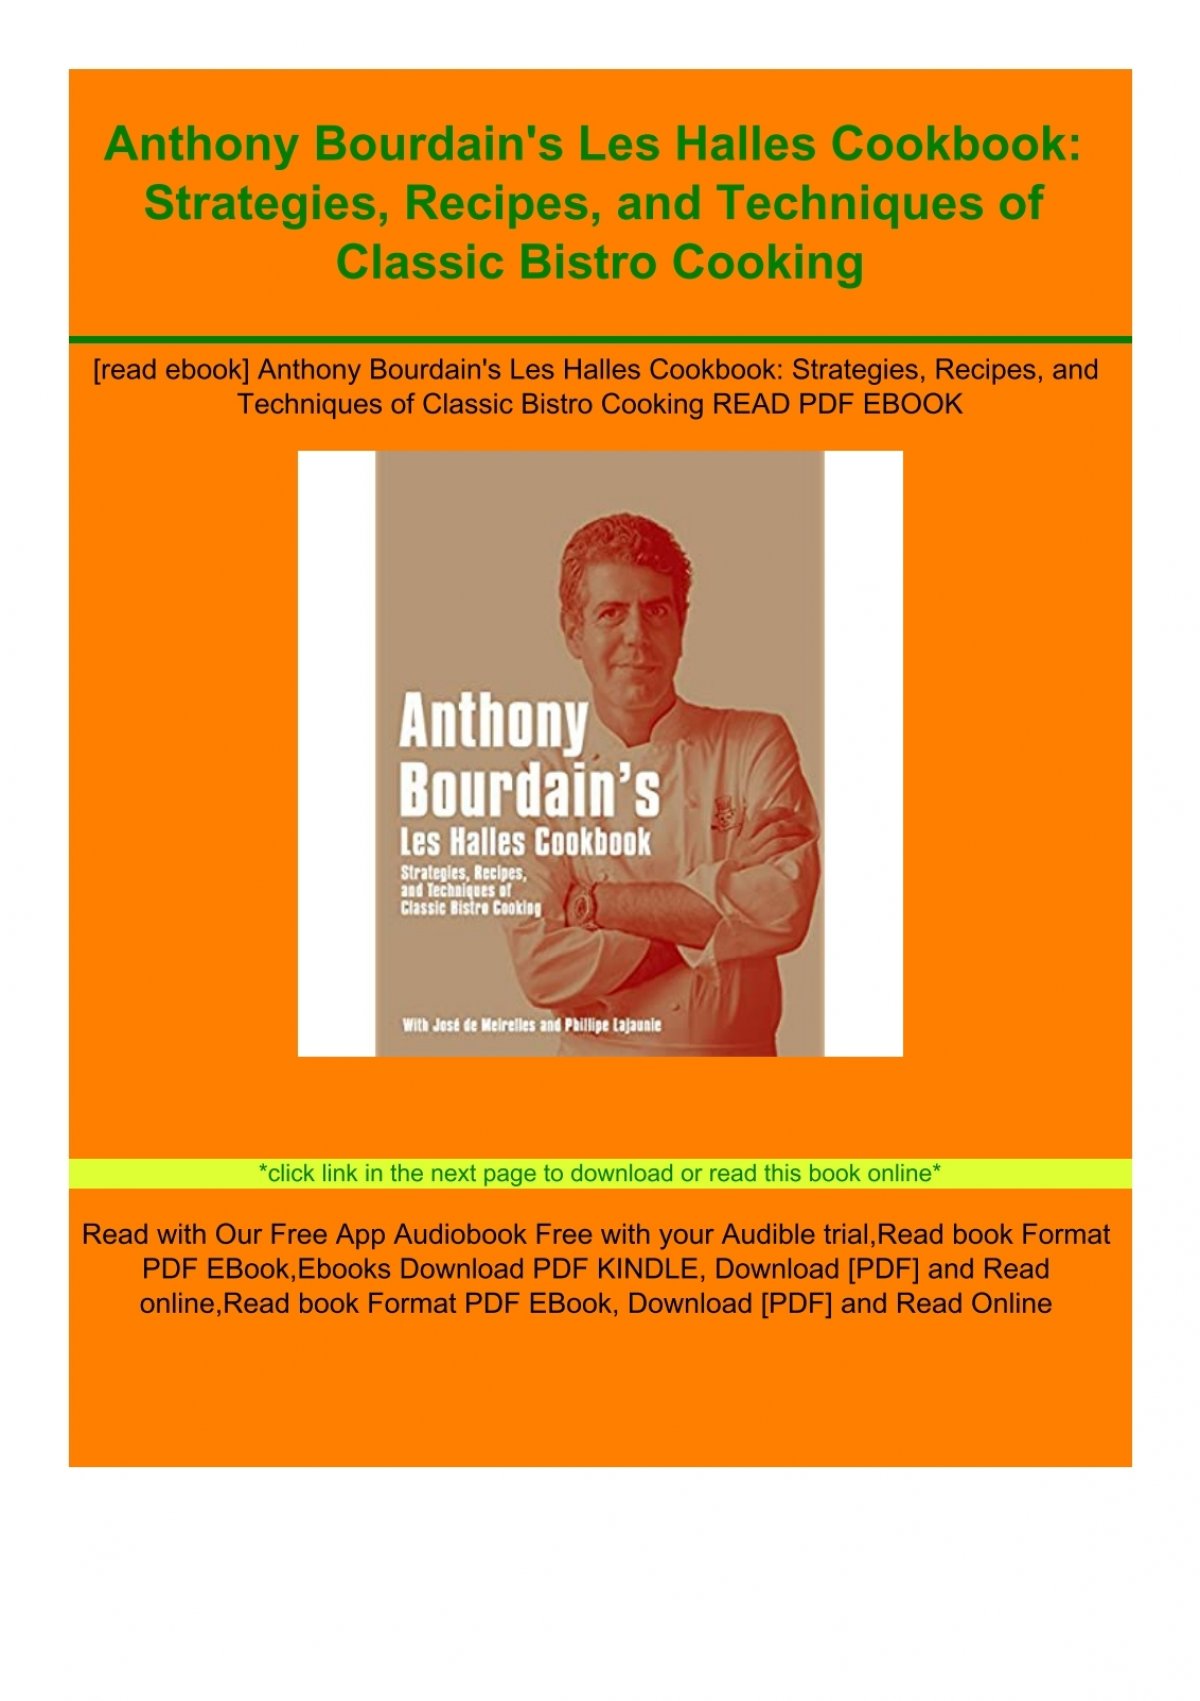 Anthony Bourdains Les Halles Cookbook Strategies Recipes And Techniques Of Classic Bistro Cooking Download Free Ebook